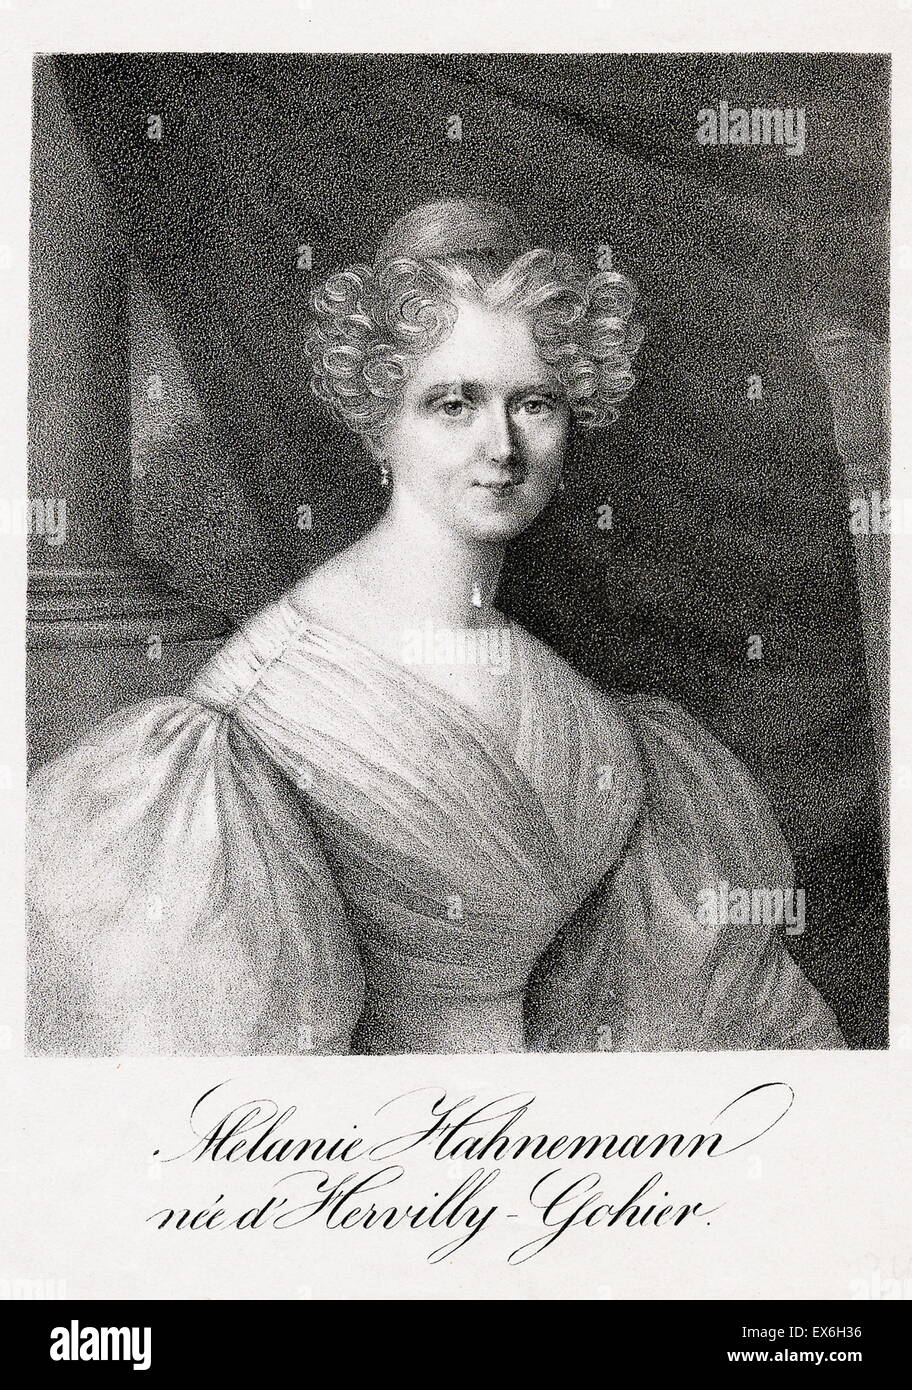 Portrait of Mélanie Hahnemann (1800-1878), the second wife of Samuel Hahnemann the founder of Homeopathy. Dated 1840 Stock Photo